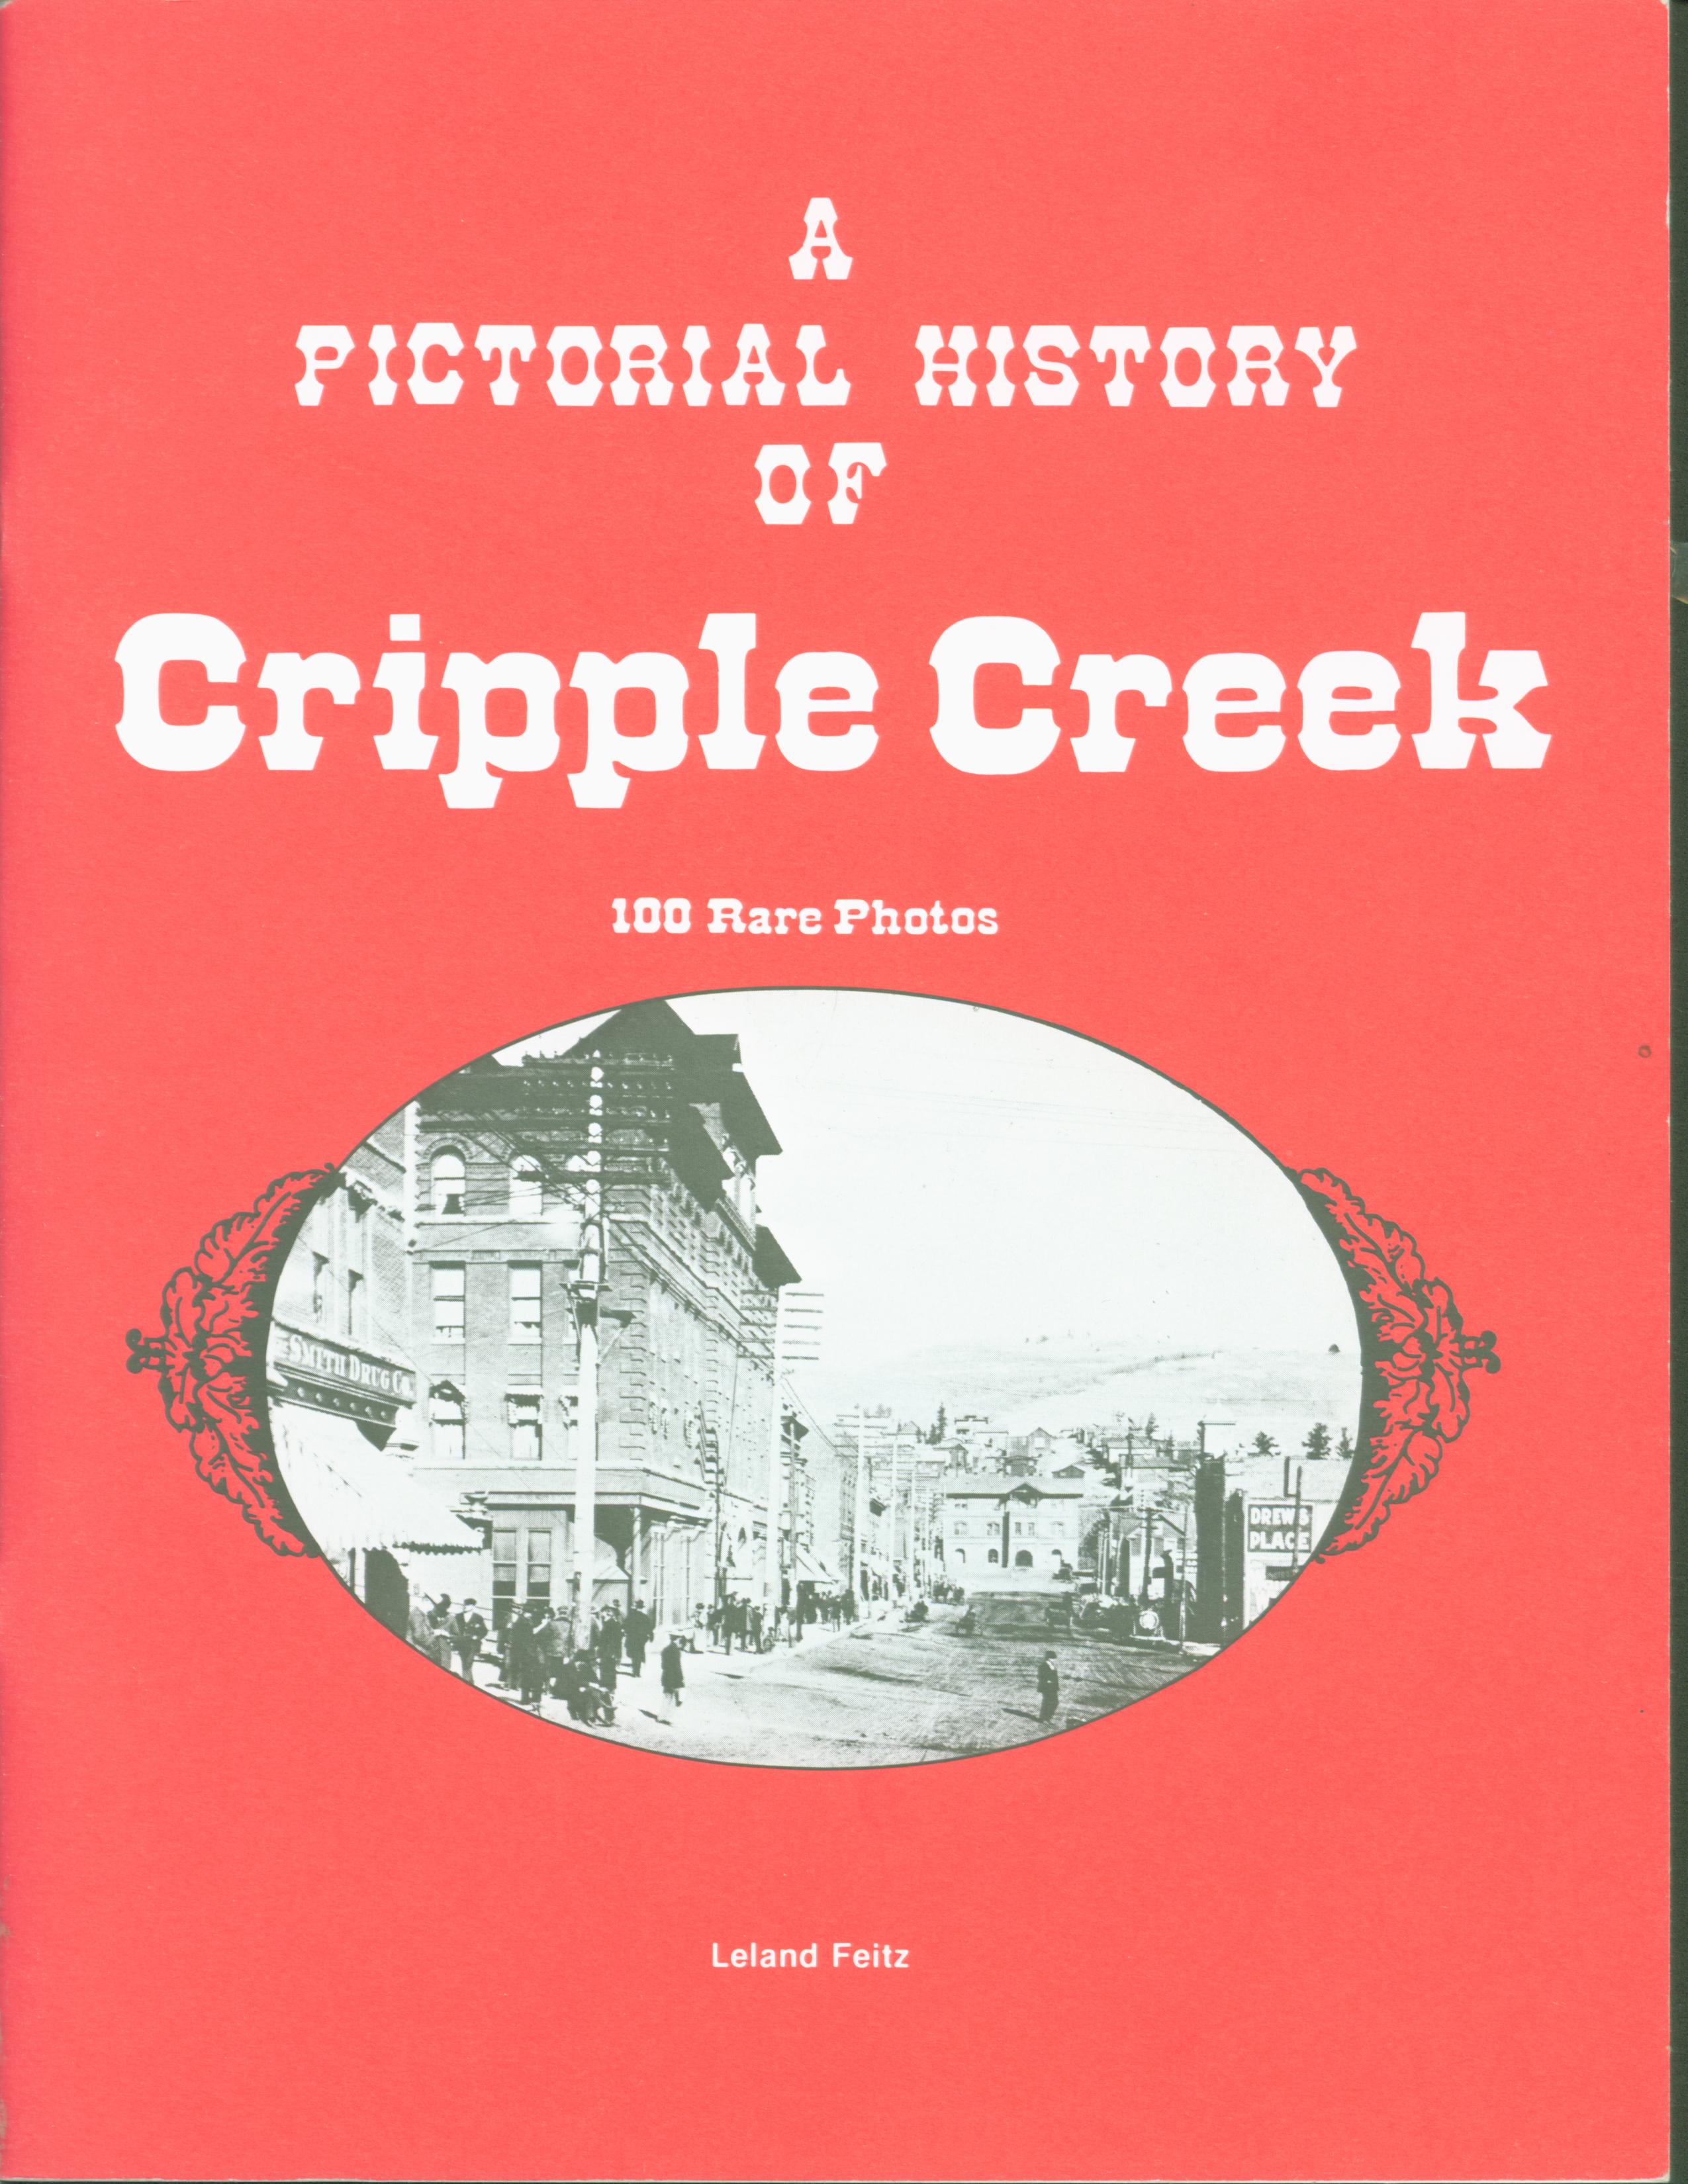 A PICTORIAL HISTORY OF CRIPPLE CREEK. 